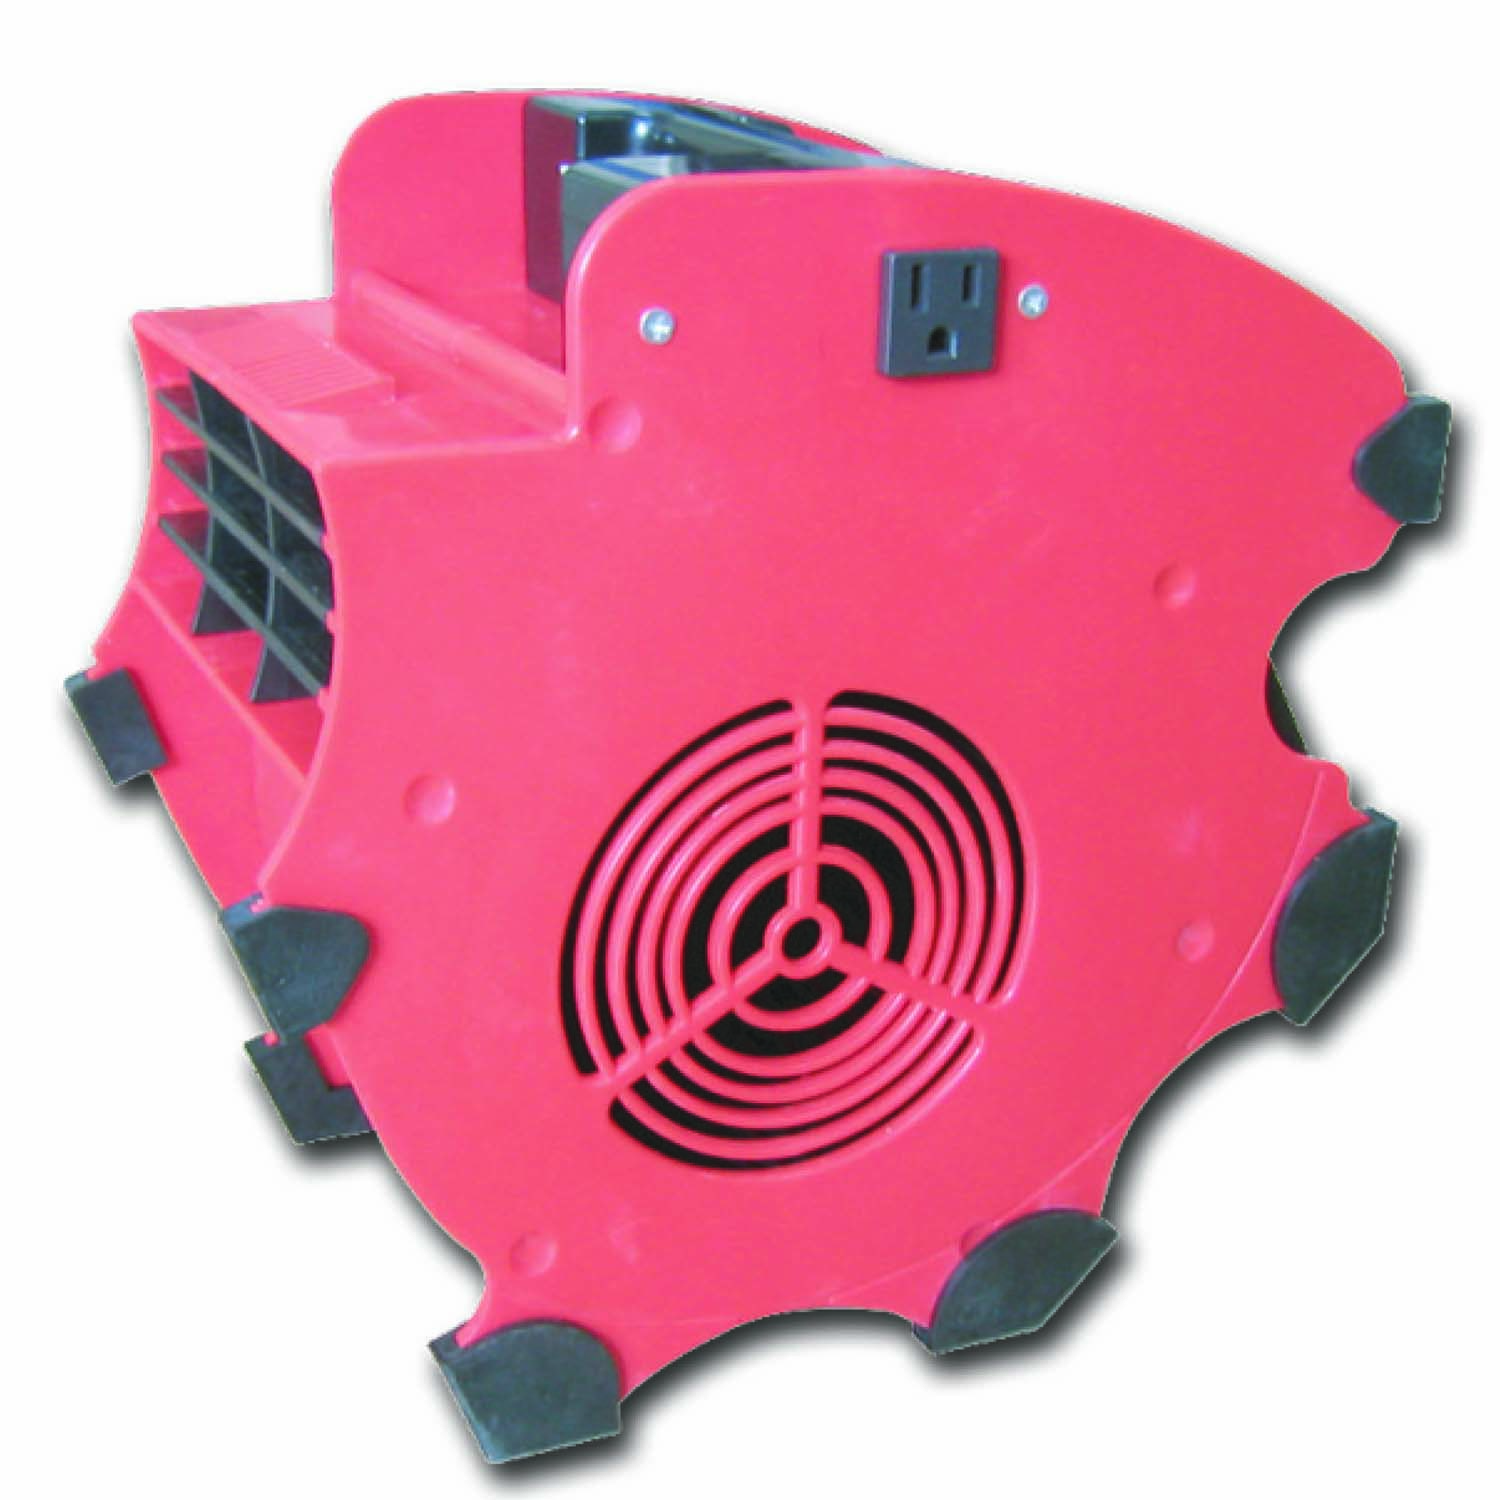 Airmaster® 78966 Optional Heater Attachment, For Use With Portable Utility Blower, 1320 W 120 VAC 10 A 60 Hz, 4500 Btu/hr Heating Capacity, Import